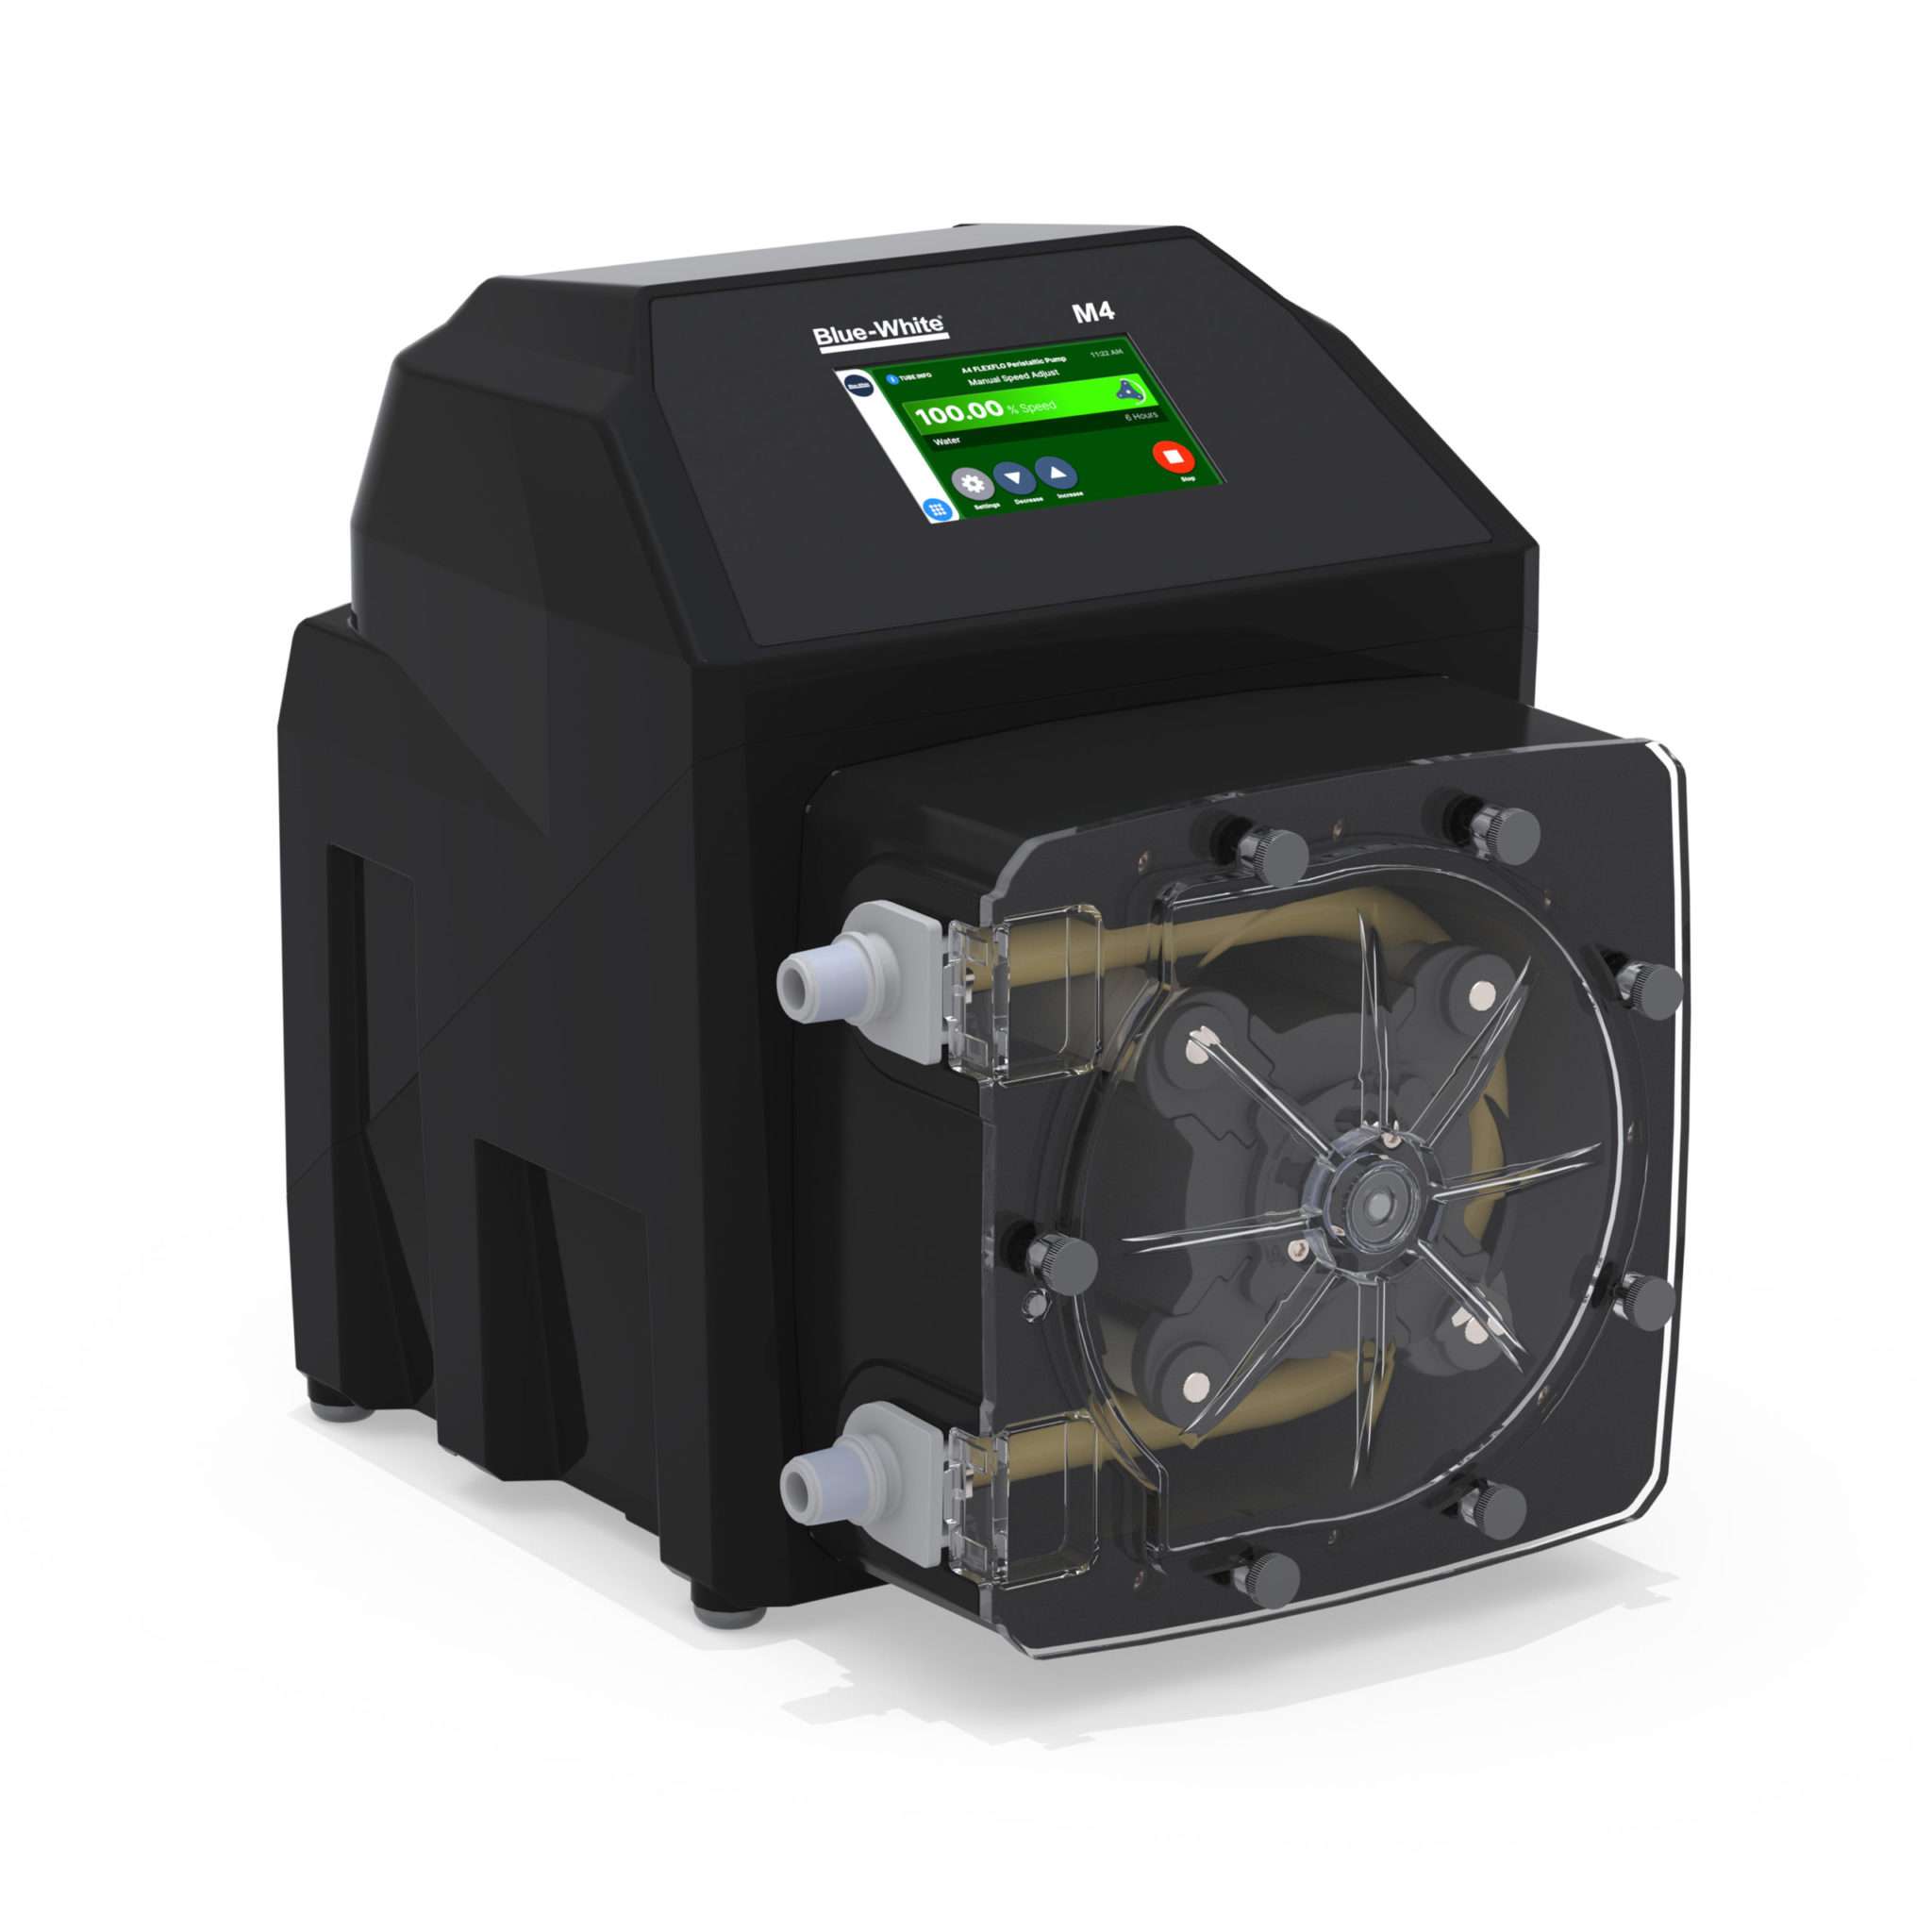 FLEXFLO® M4 Peristaltic Metering Pump for Municipal wastewater treatment applications